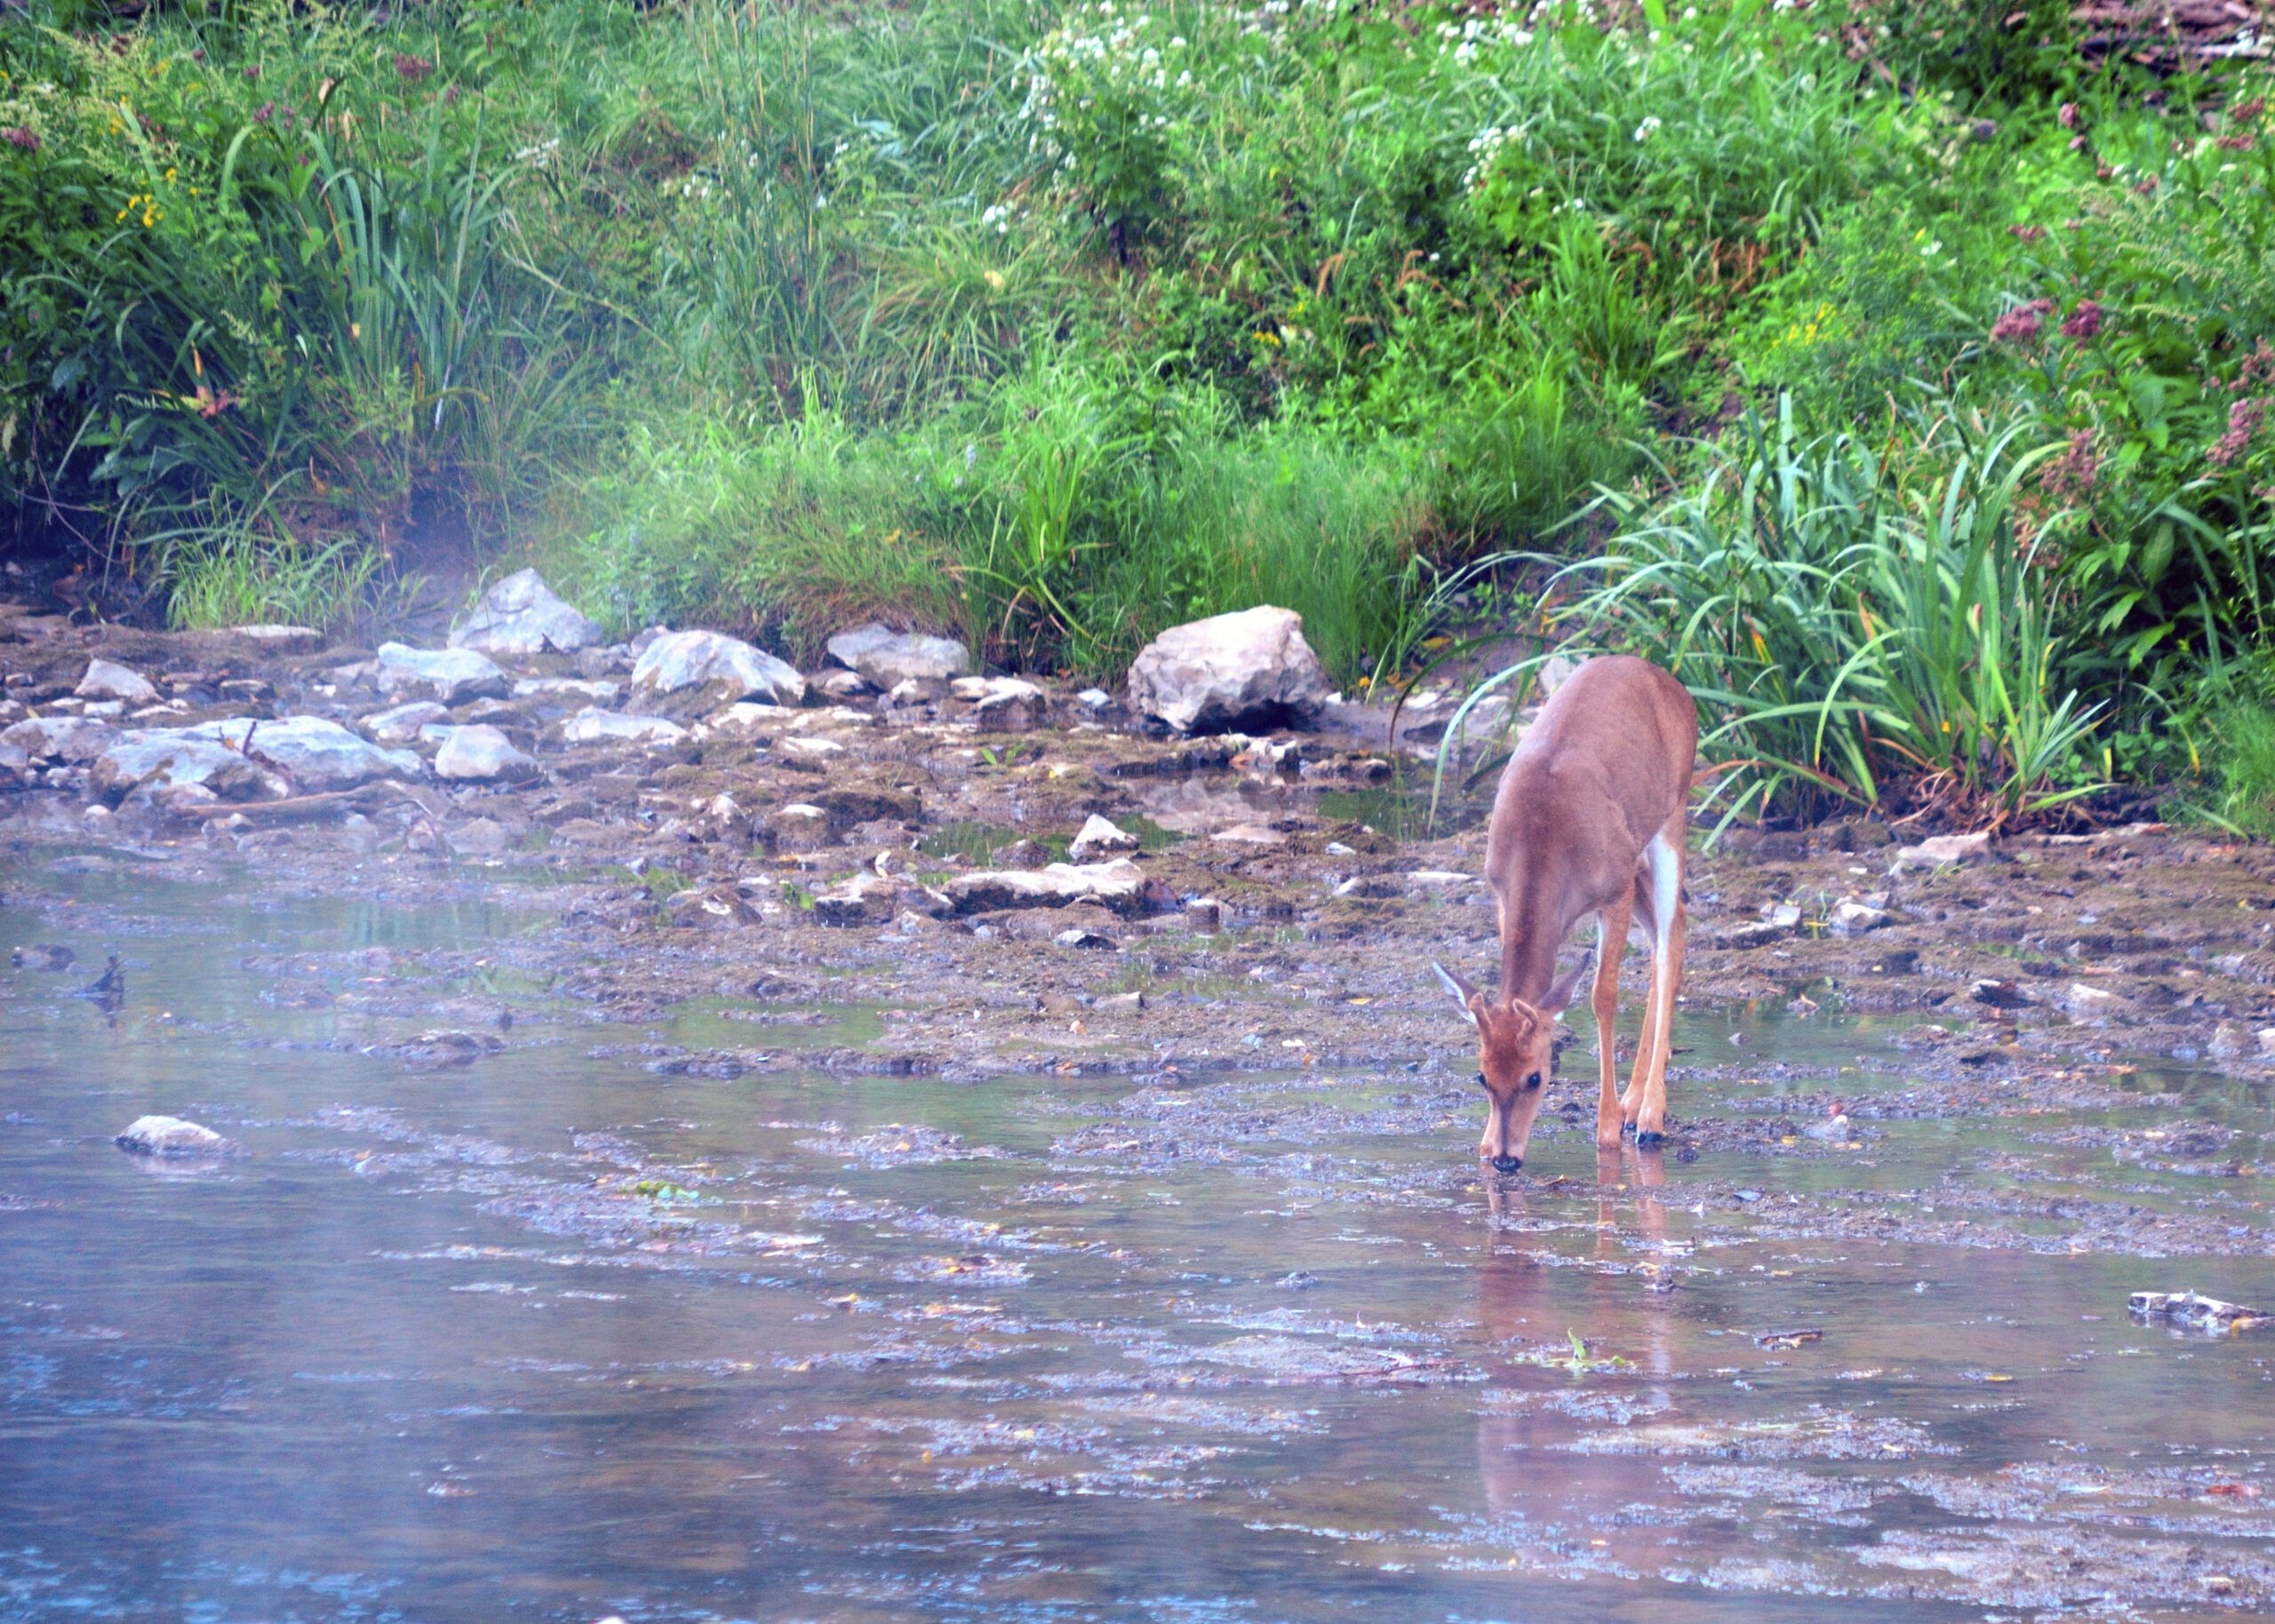 A doe drinks from a river